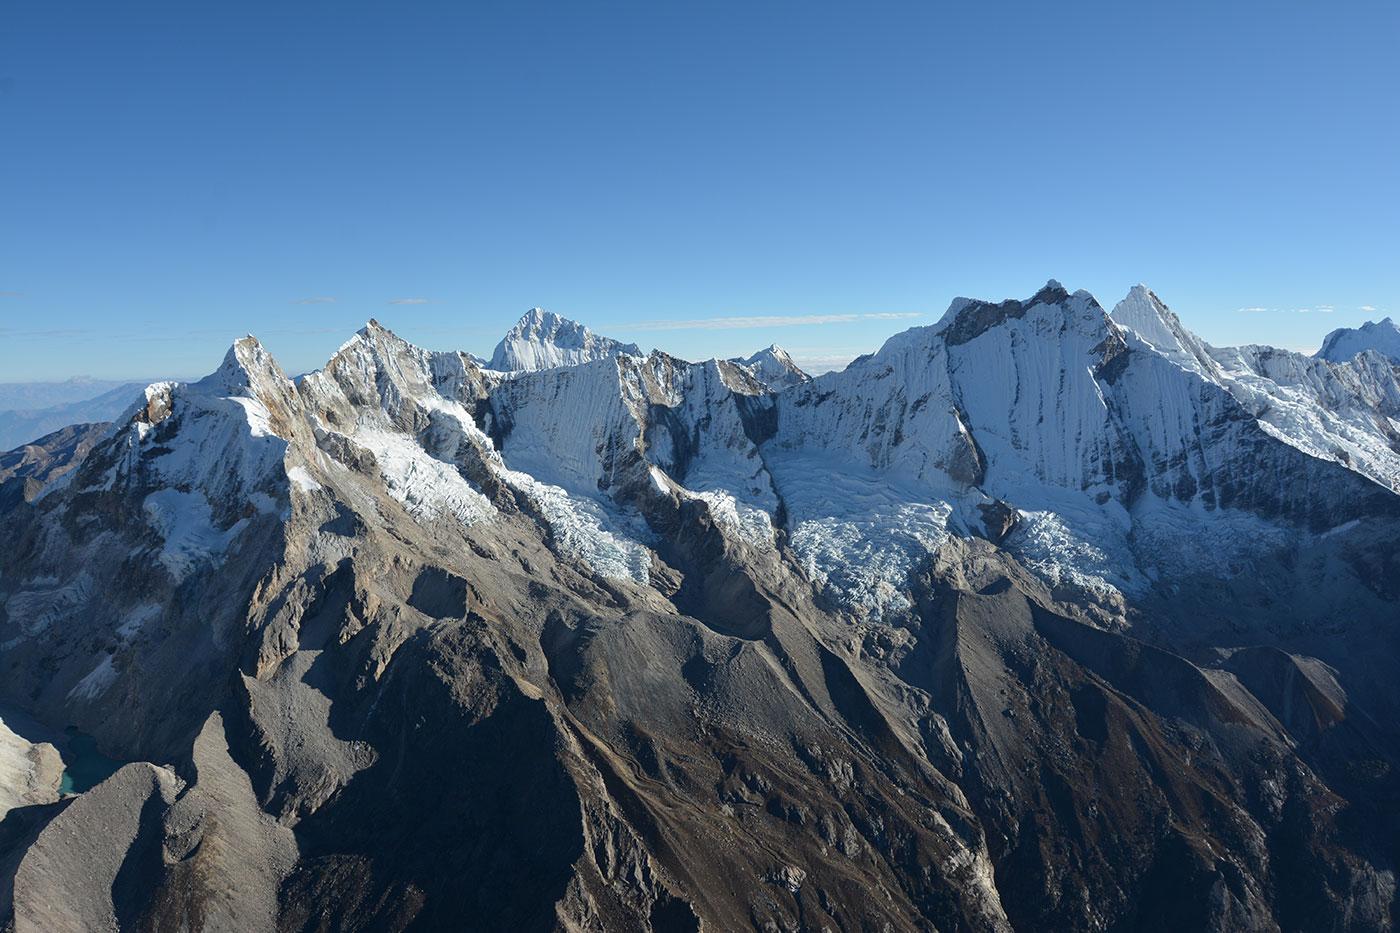 Snow-capped peaks in the Peruvian Andes mountains near Huascaran National Park. Photo: BBC/Matthew Wright